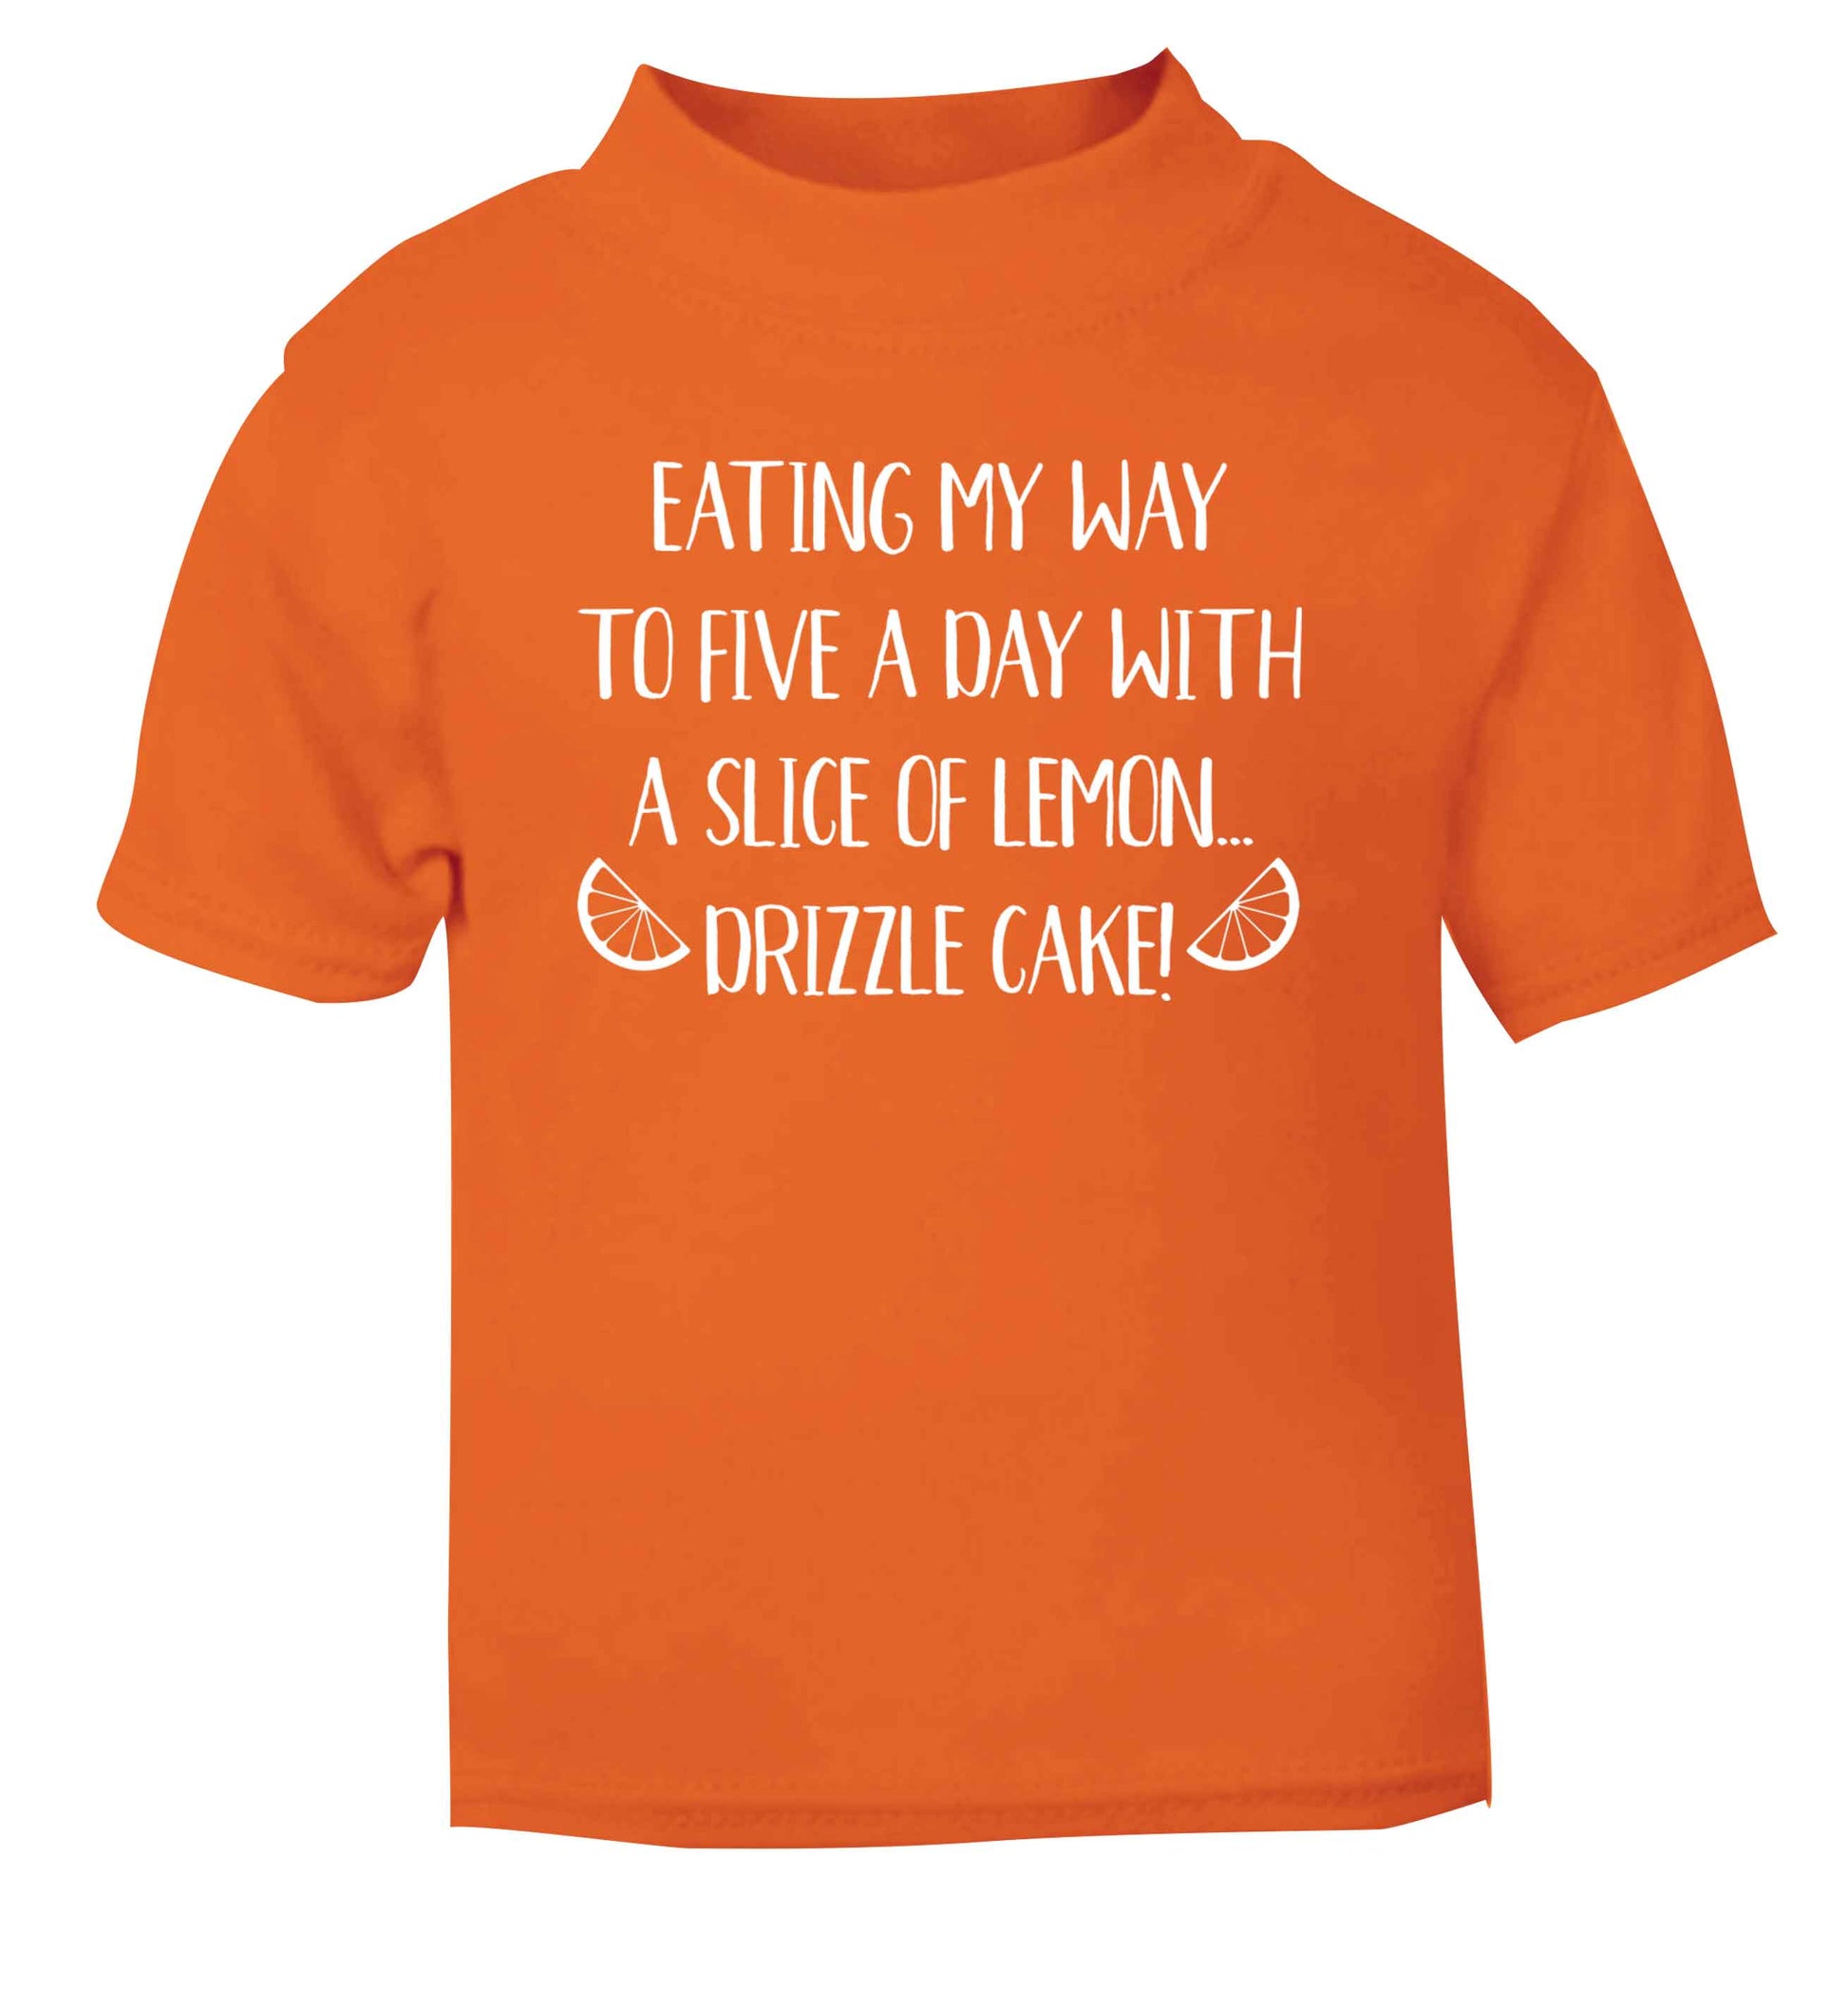 Eating my way to five a day with a slice of lemon drizzle cake day orange Baby Toddler Tshirt 2 Years